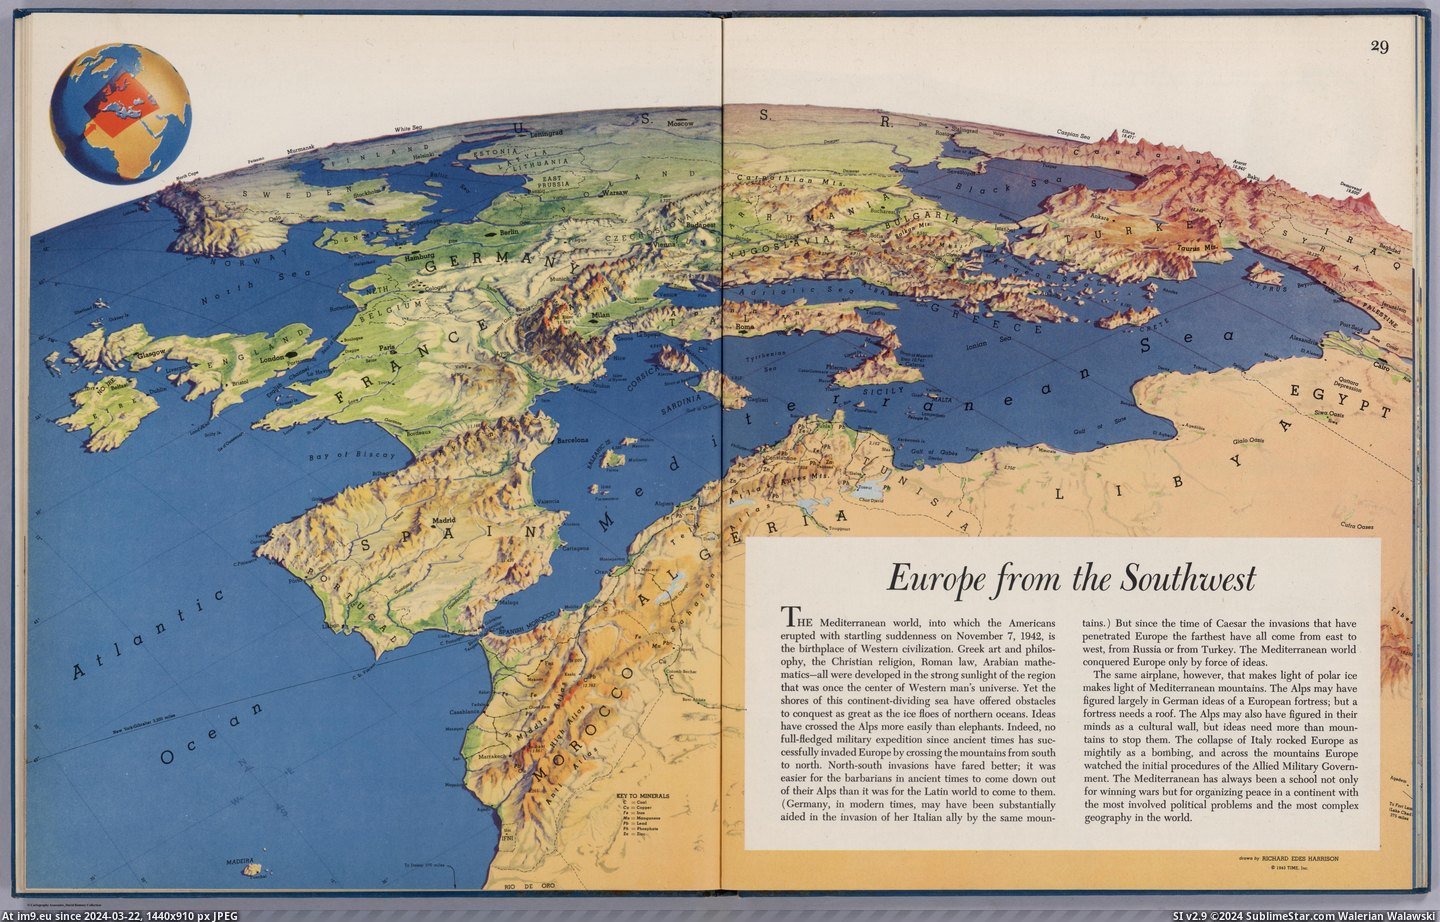 #Europe #Harrison #Southwest #Richard [Mapporn] Europe from the Southwest, made in 1943 by Richard Edes Harrison [5496x3487] Pic. (Image of album My r/MAPS favs))